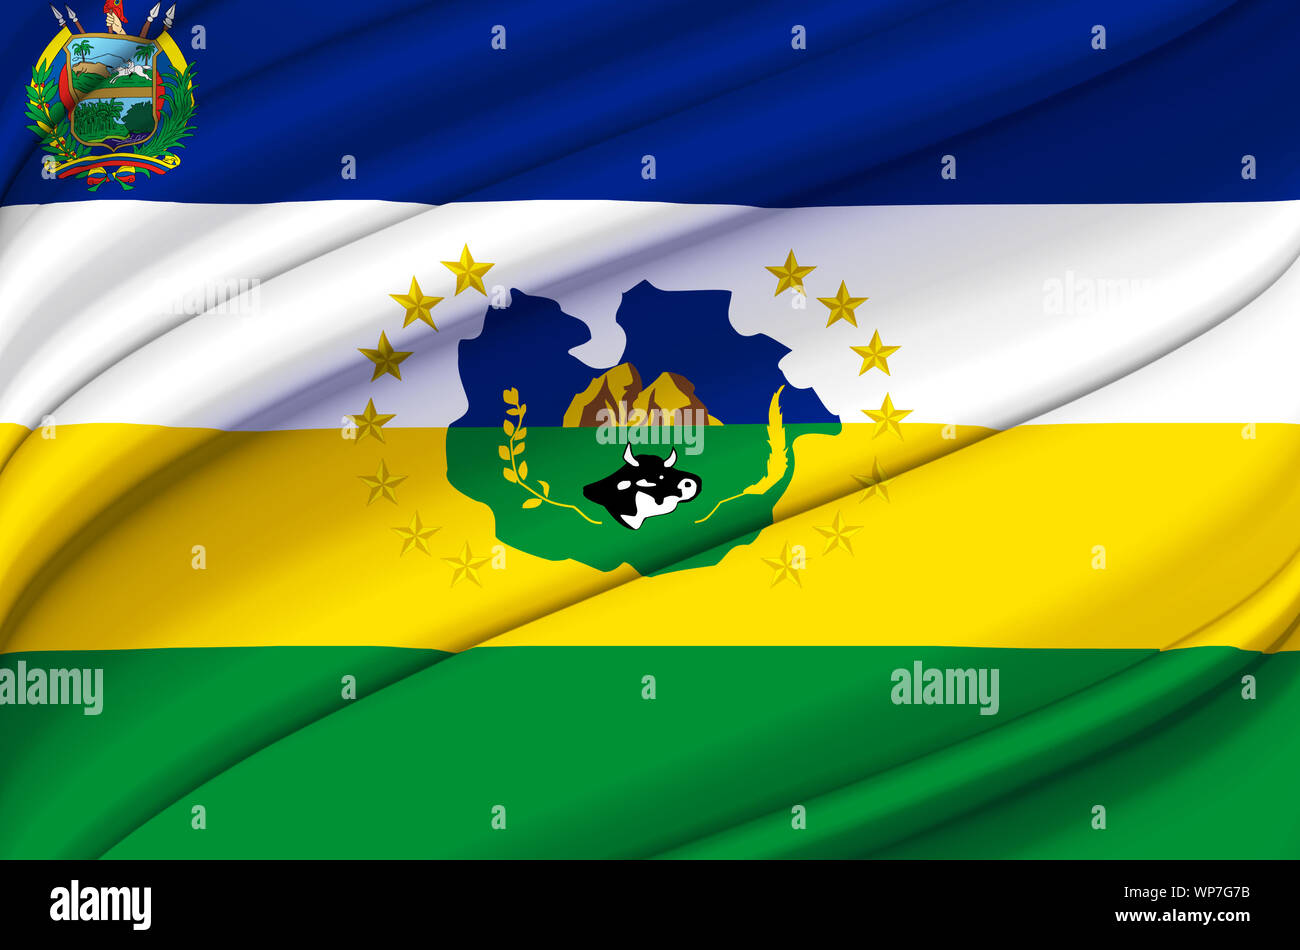 Guarico waving flag illustration. Regions of Venezuela. Perfect for background and texture usage. Stock Photo